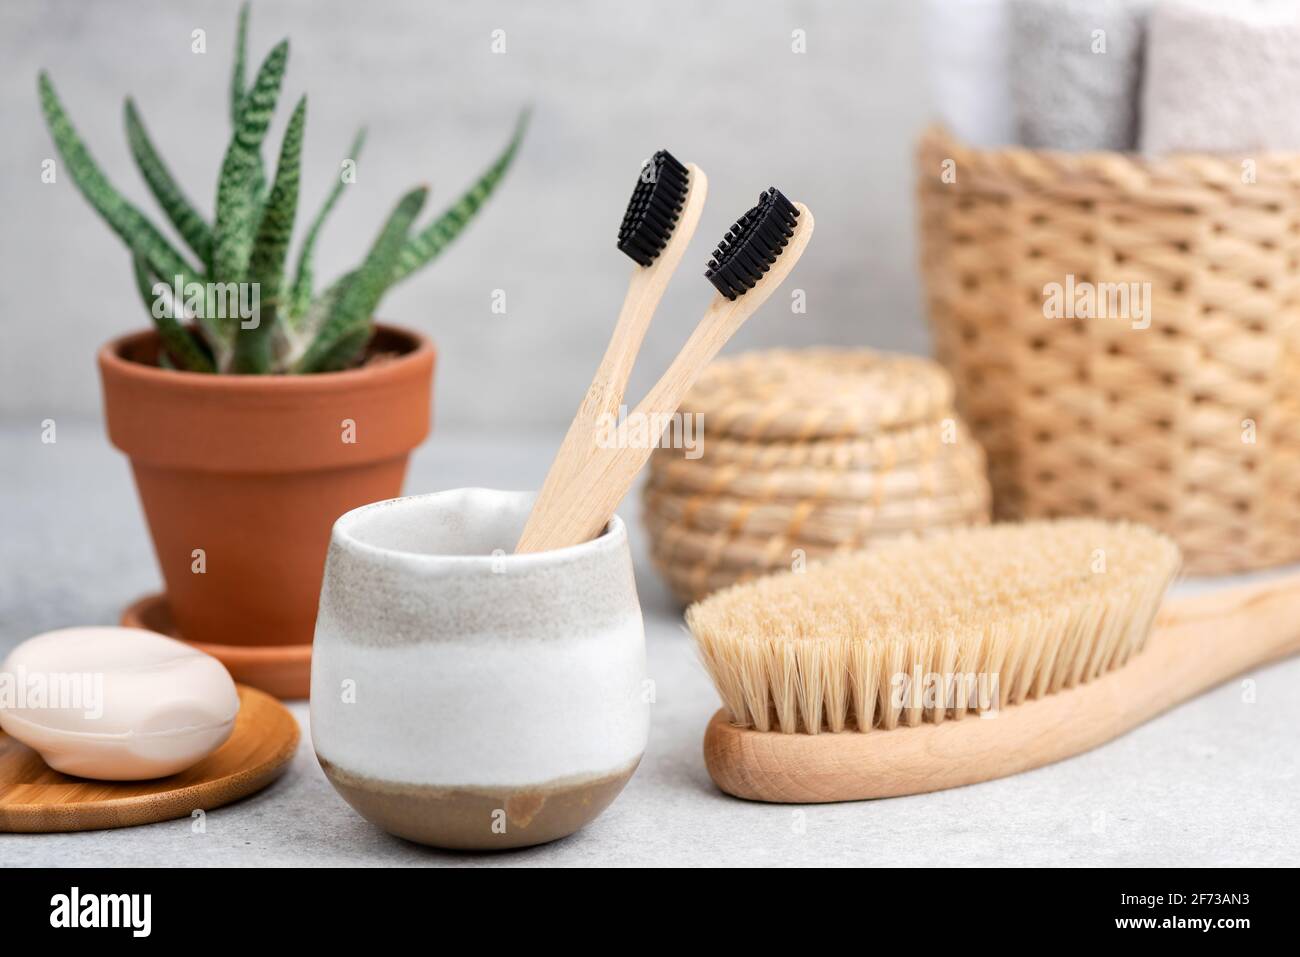 Bath and Spa accessories, zero waste concept. Bamboo Charcoal toothbrush, vegan soap, eco friendly Bath tools Stock Photo